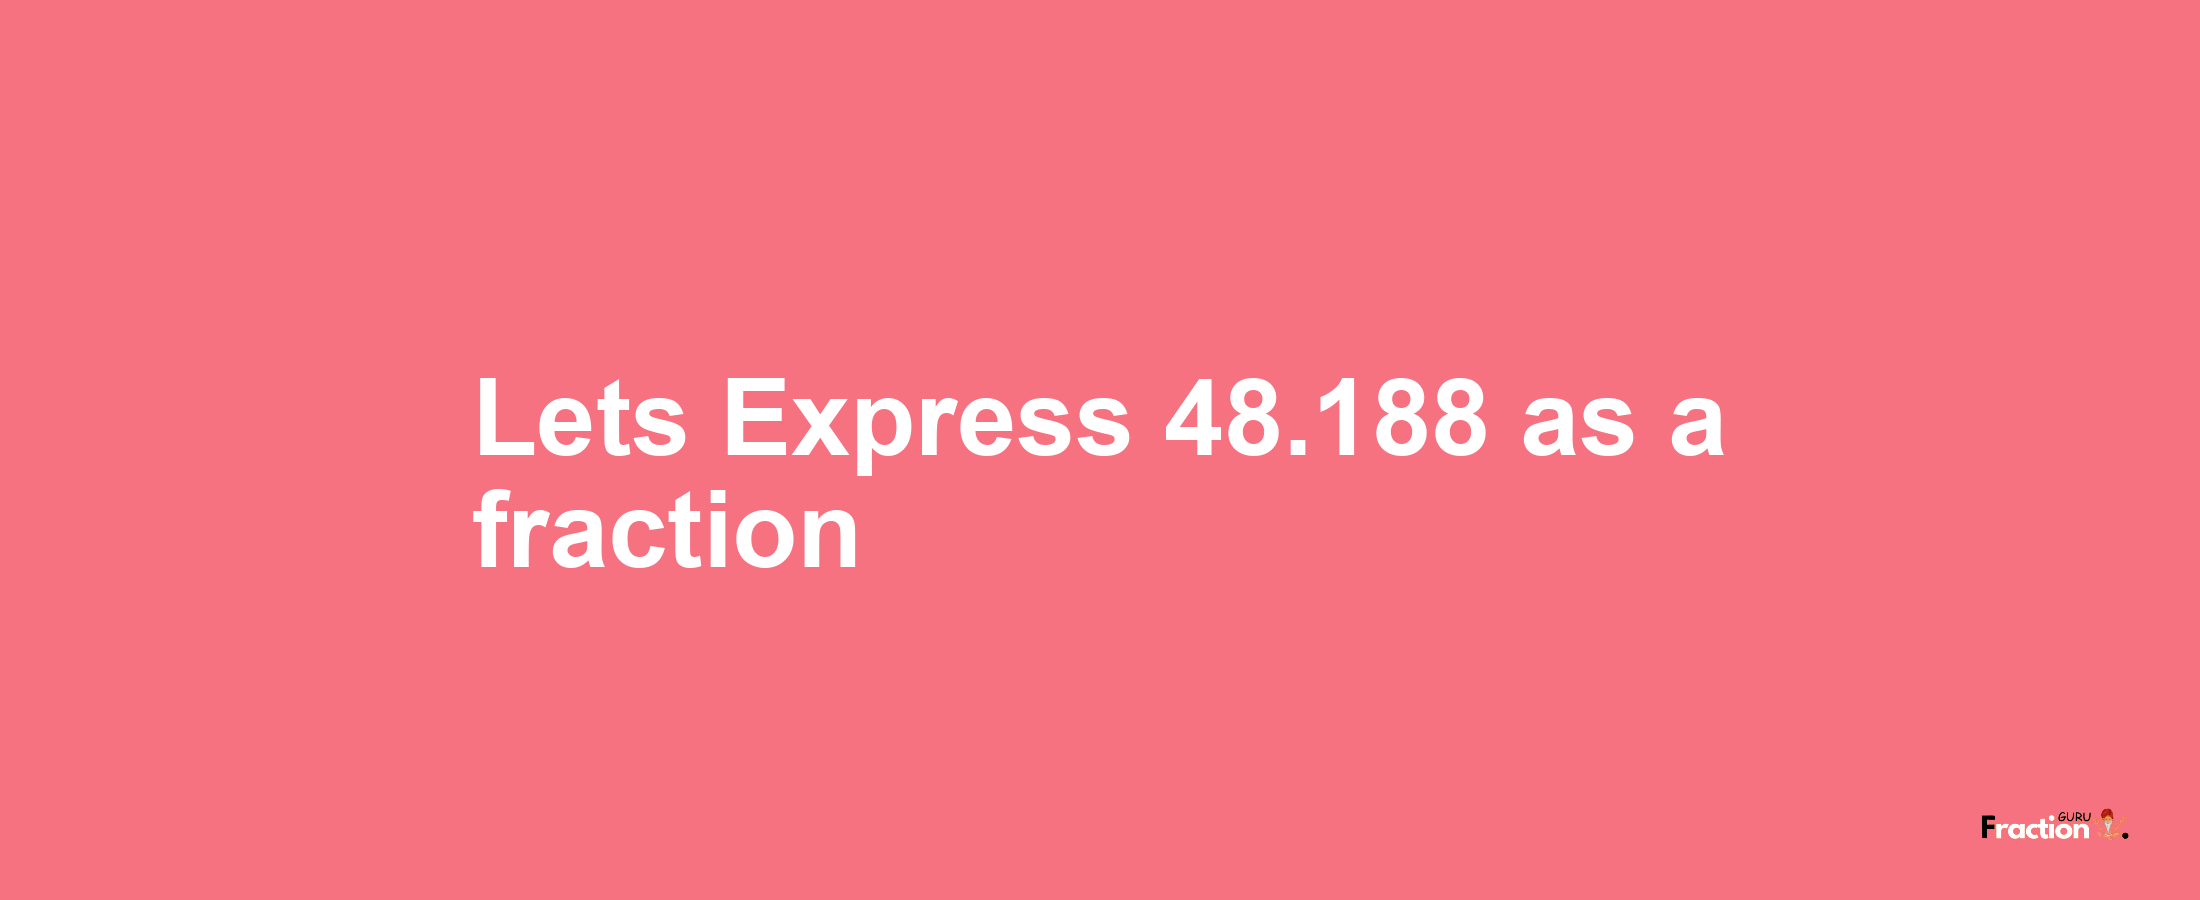 Lets Express 48.188 as afraction